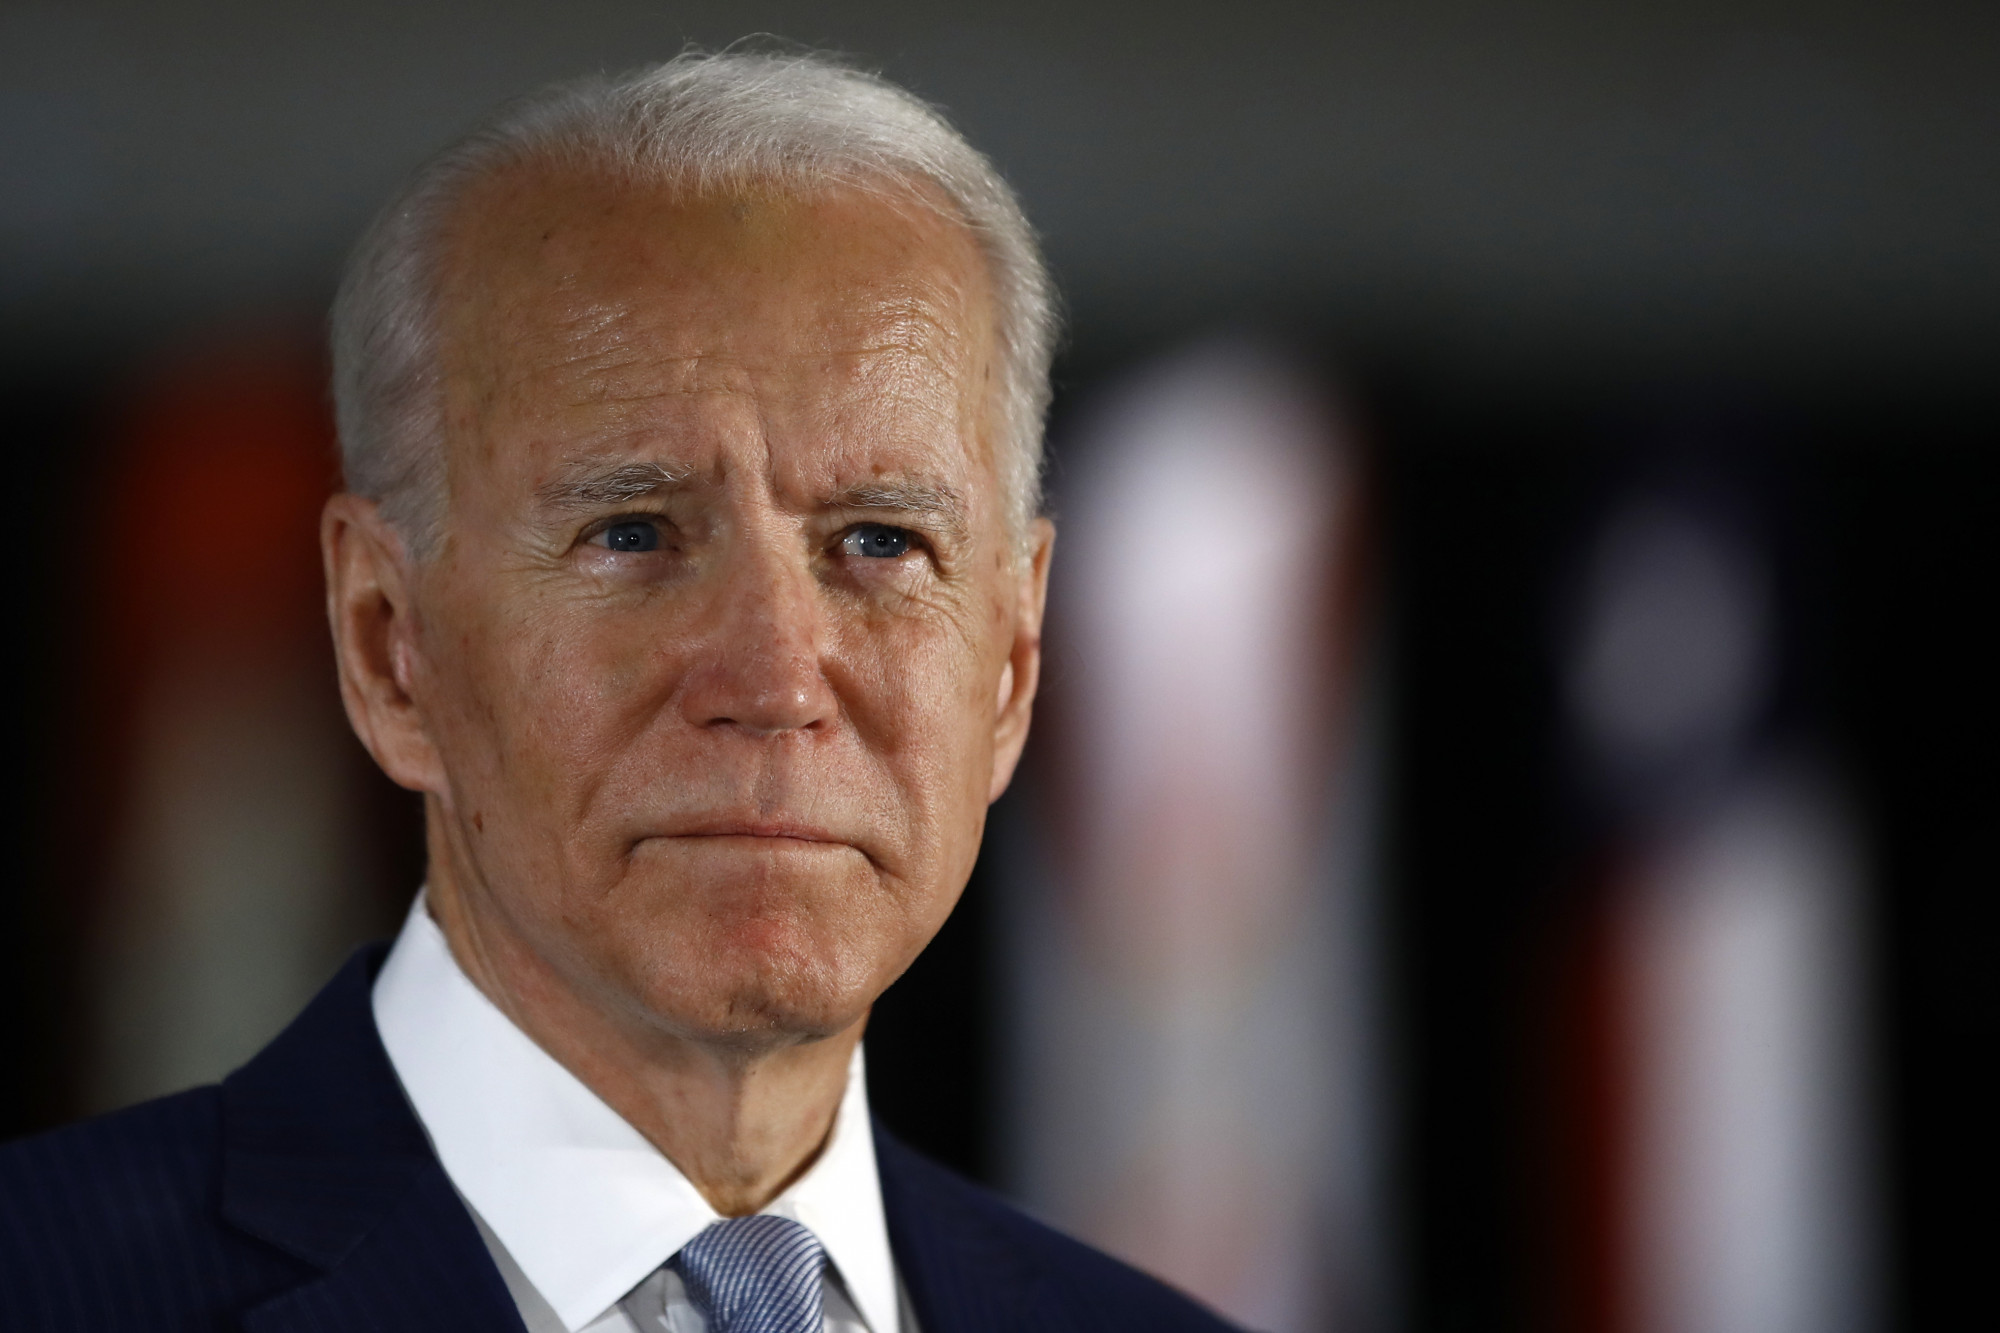 Biden to Announce His Vice President Pick Soon